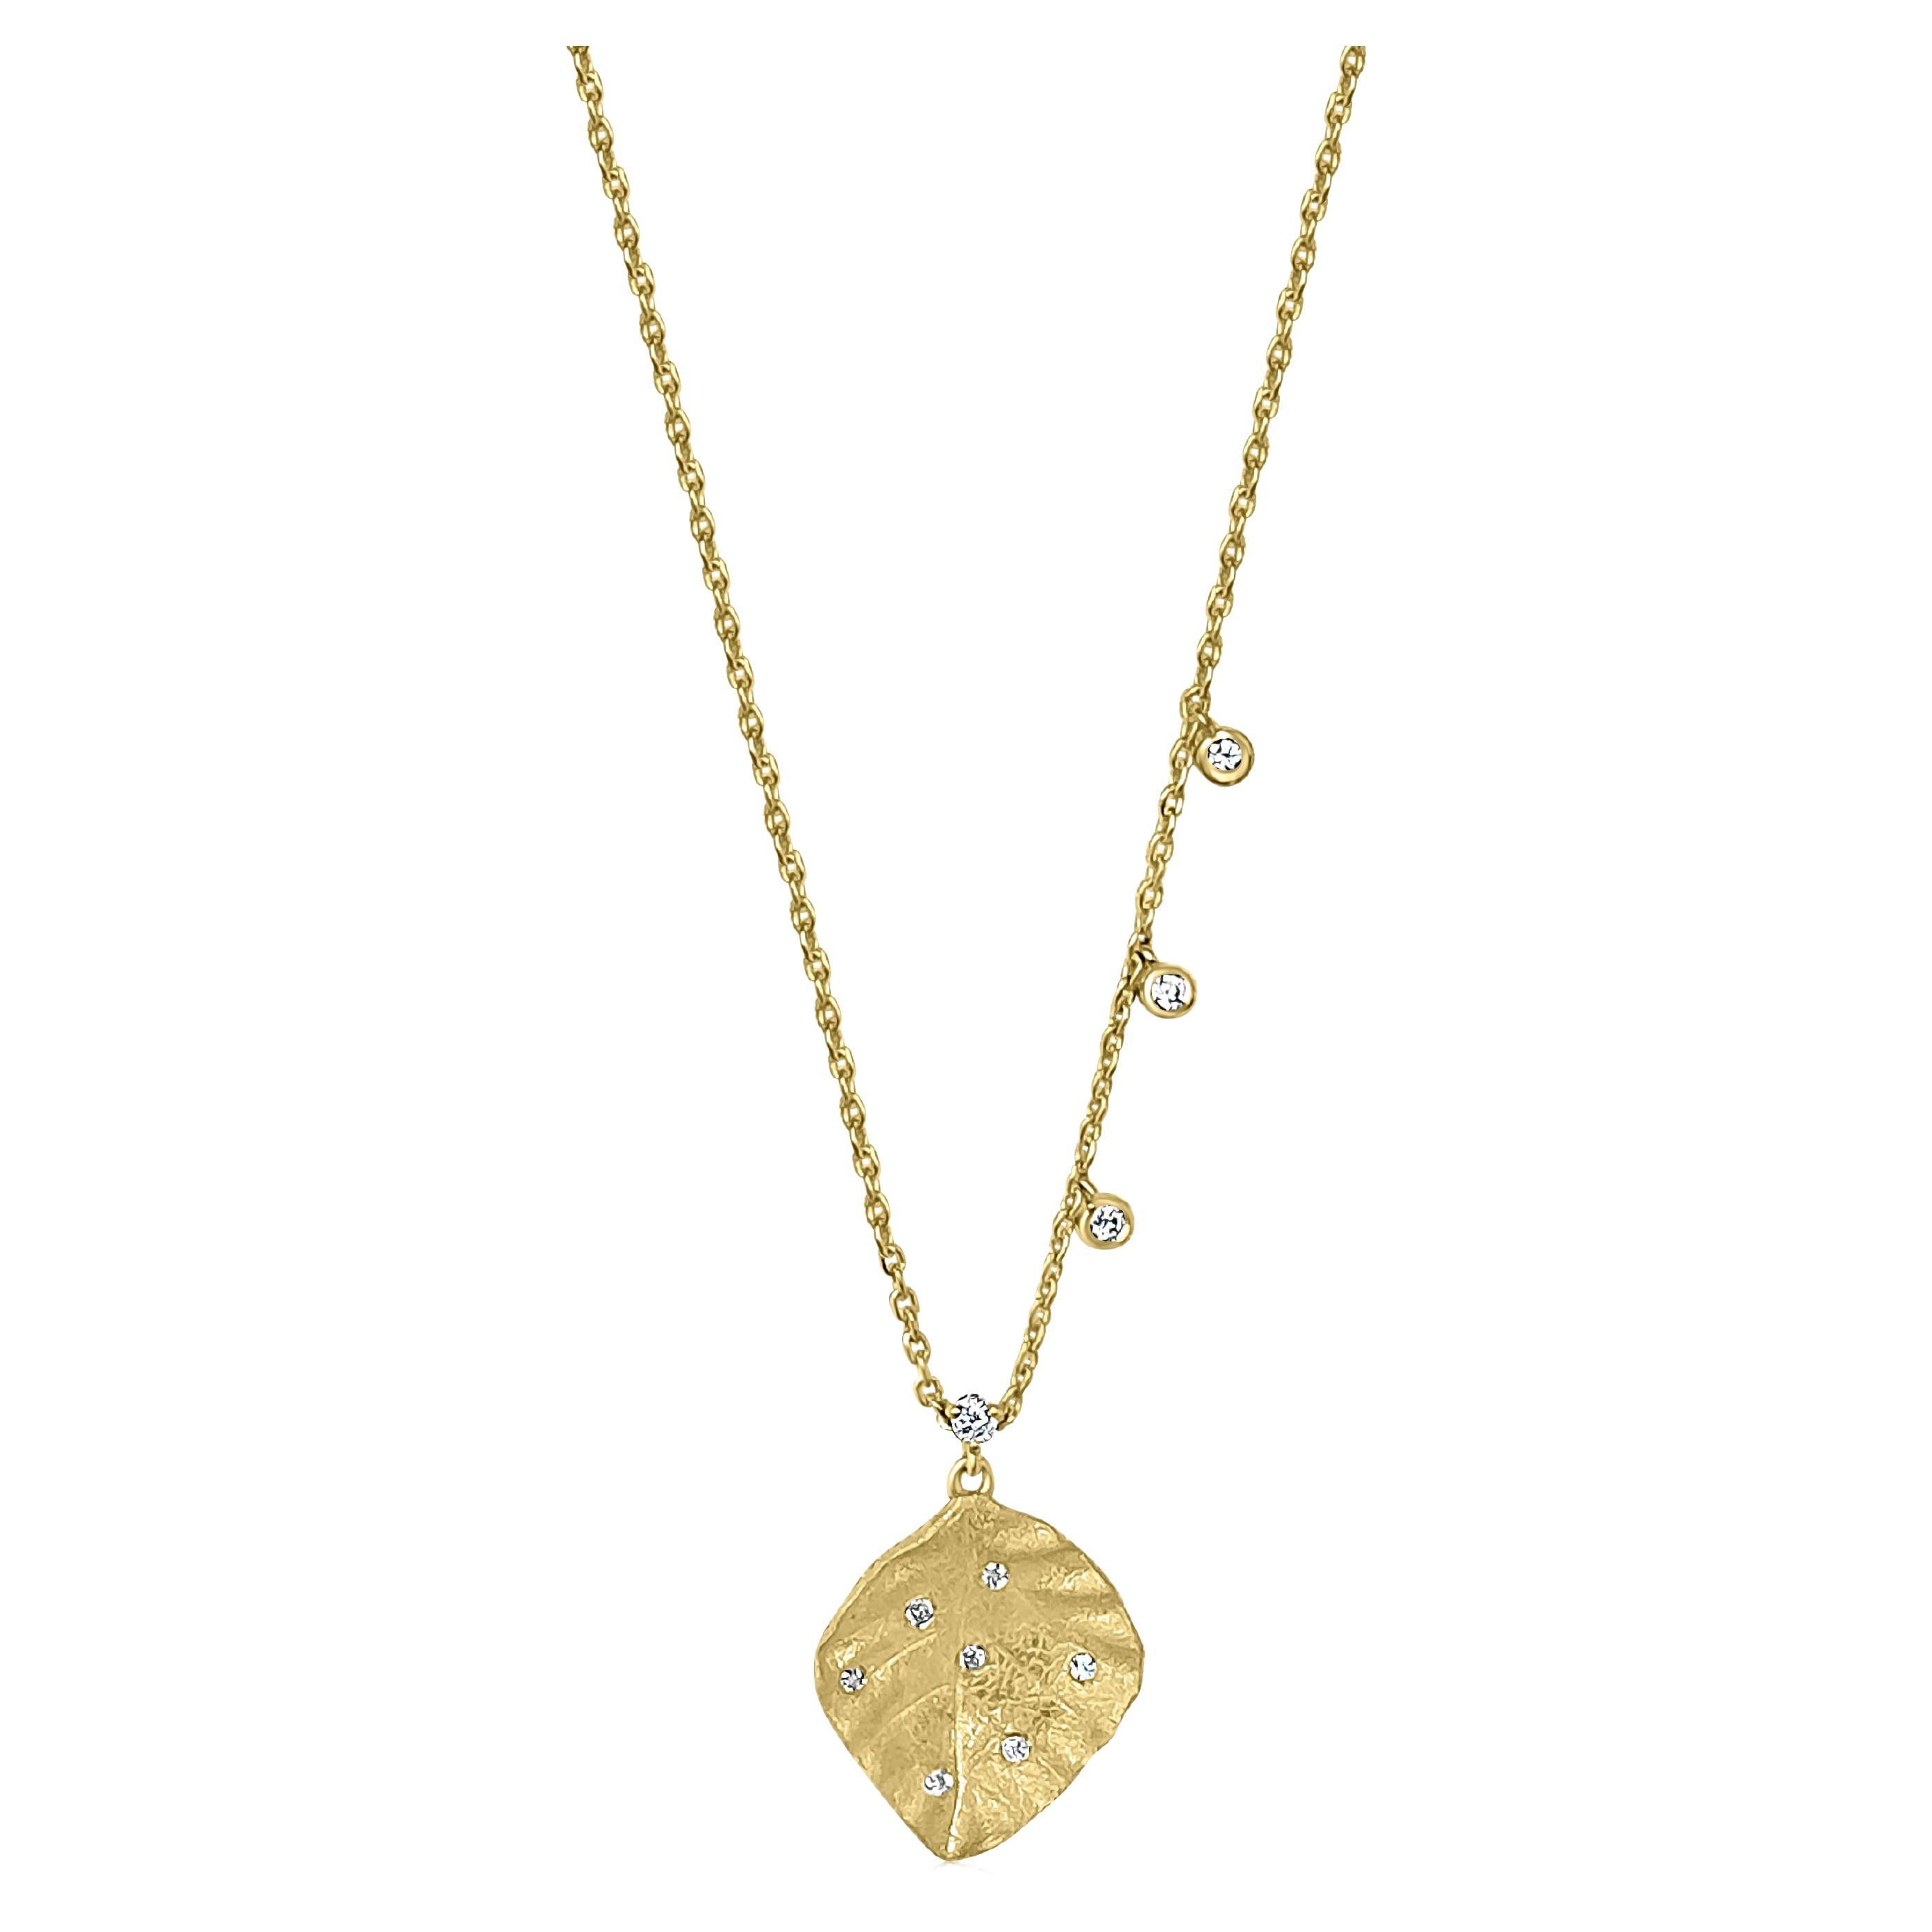 Scattered Diamonds Leaf Necklace with Three Asymmetrical Diamond Charms